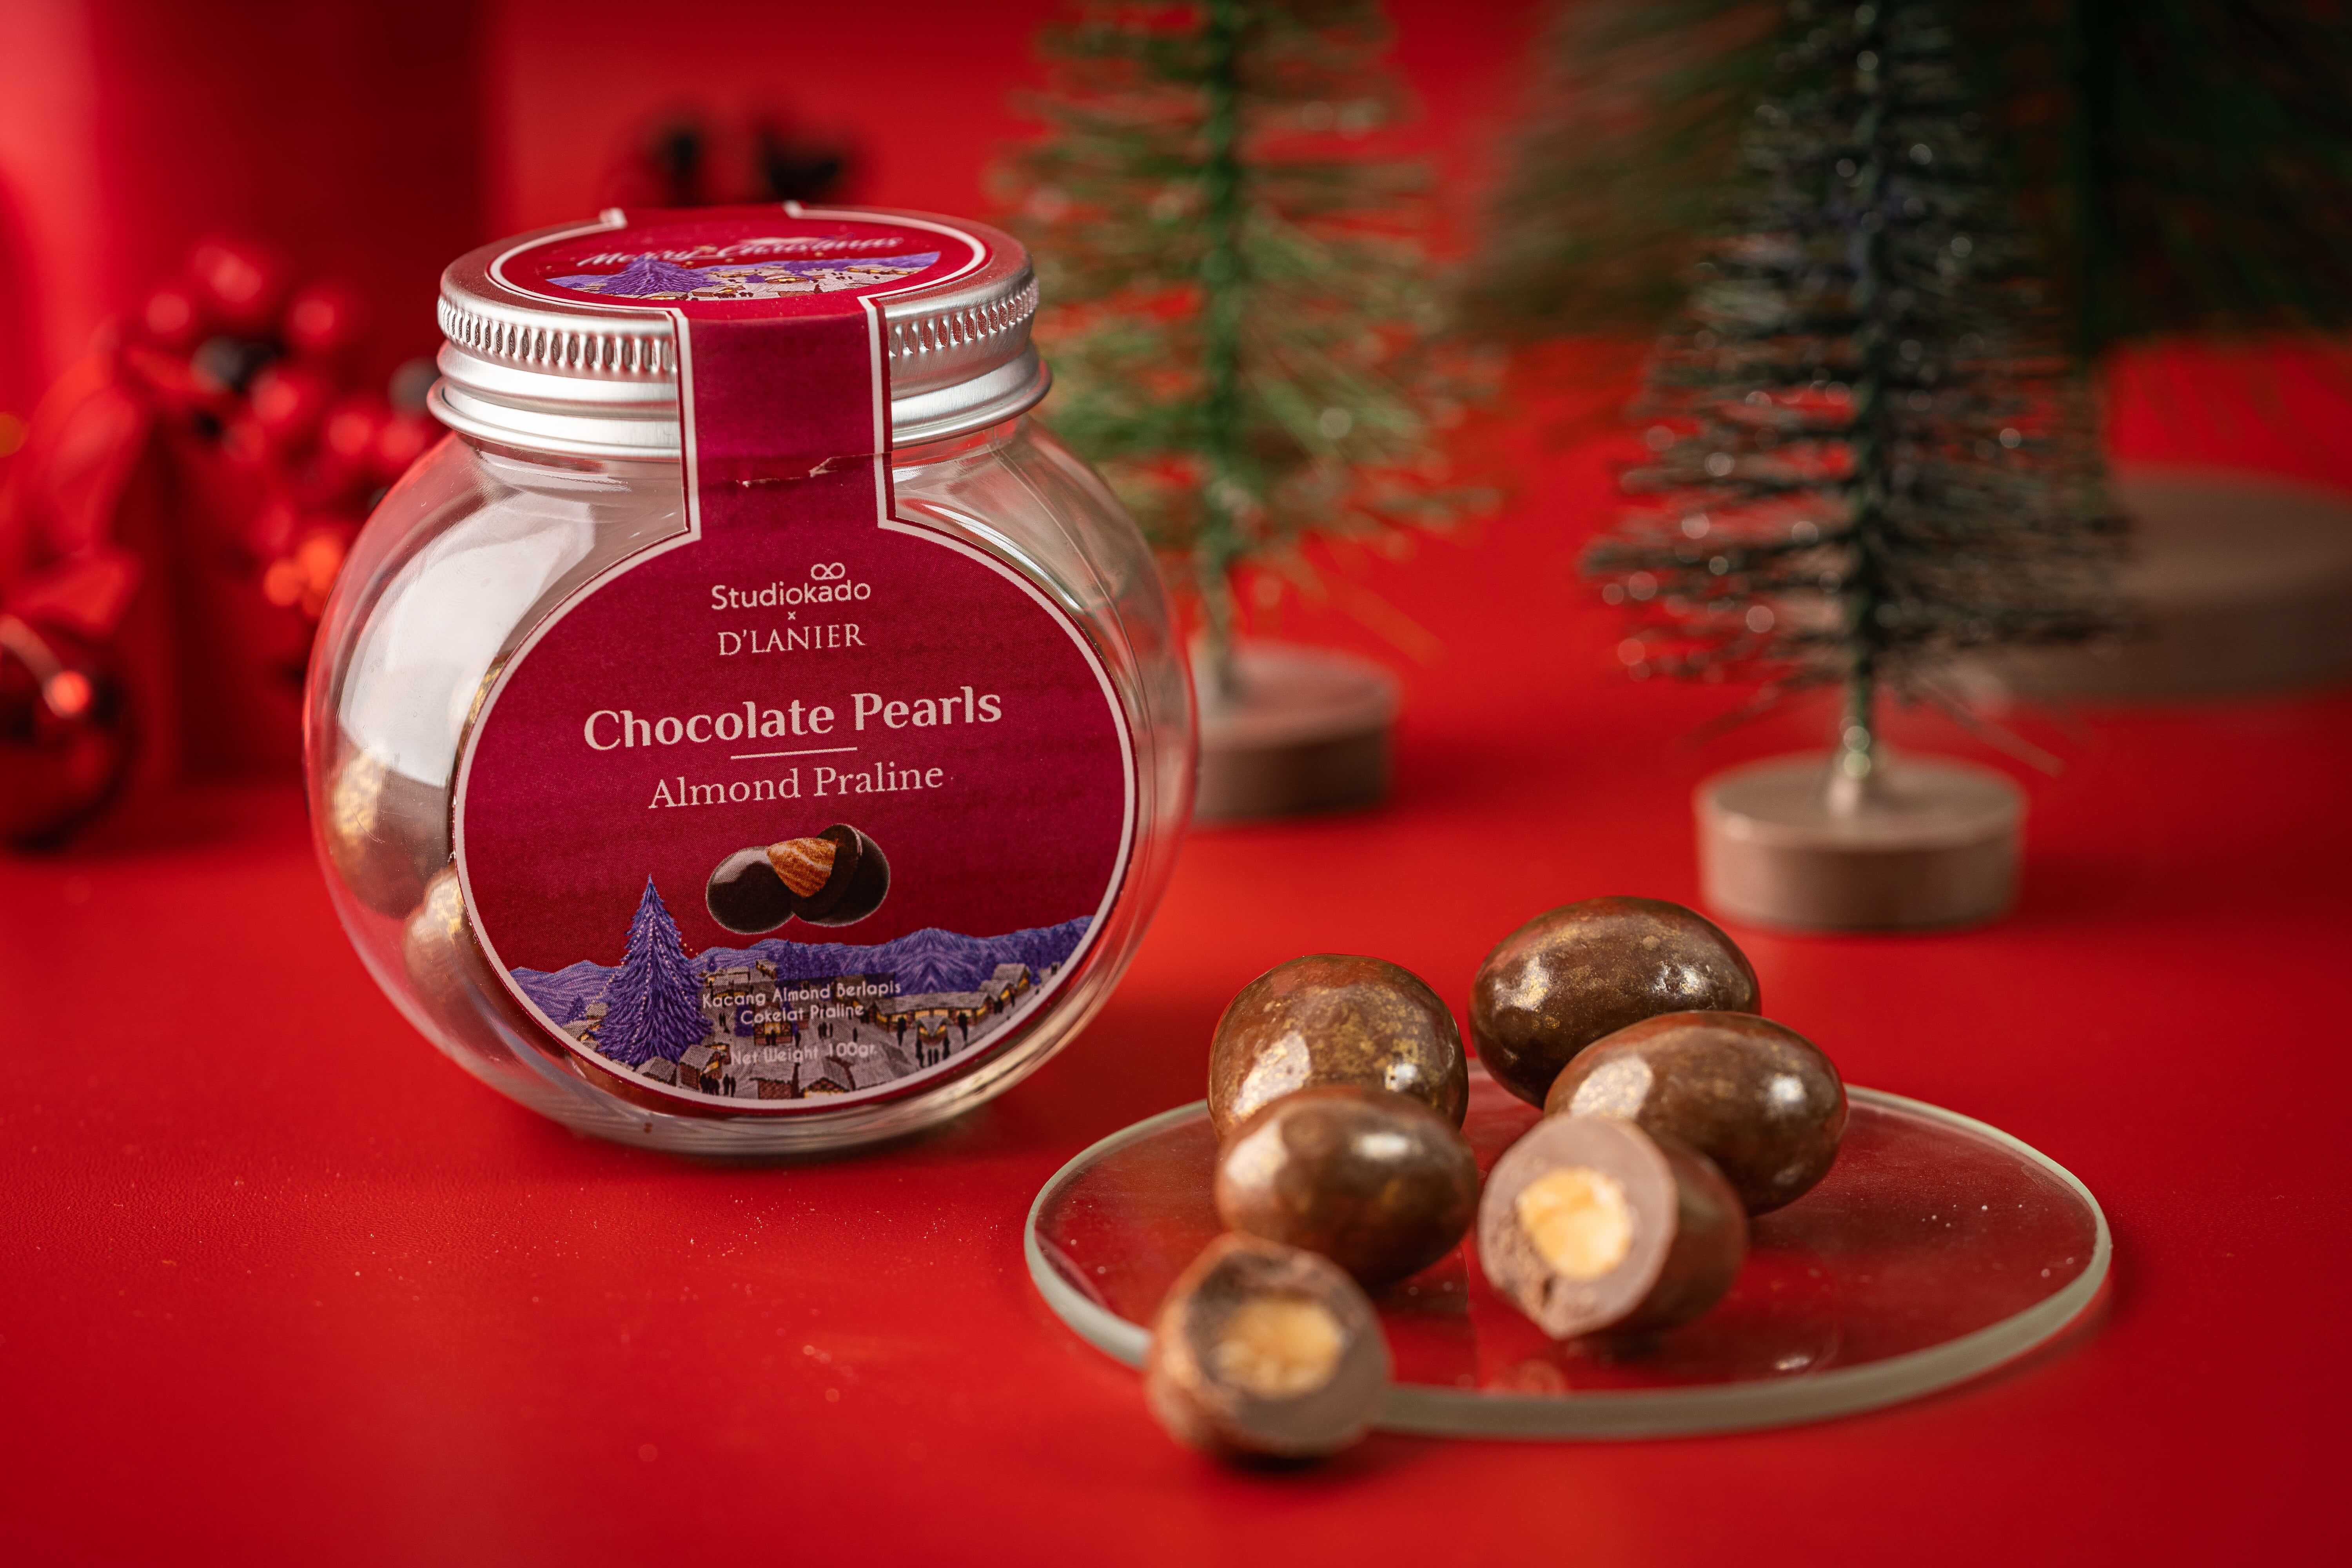 Chocolate is one of the staples of Christmas snacks